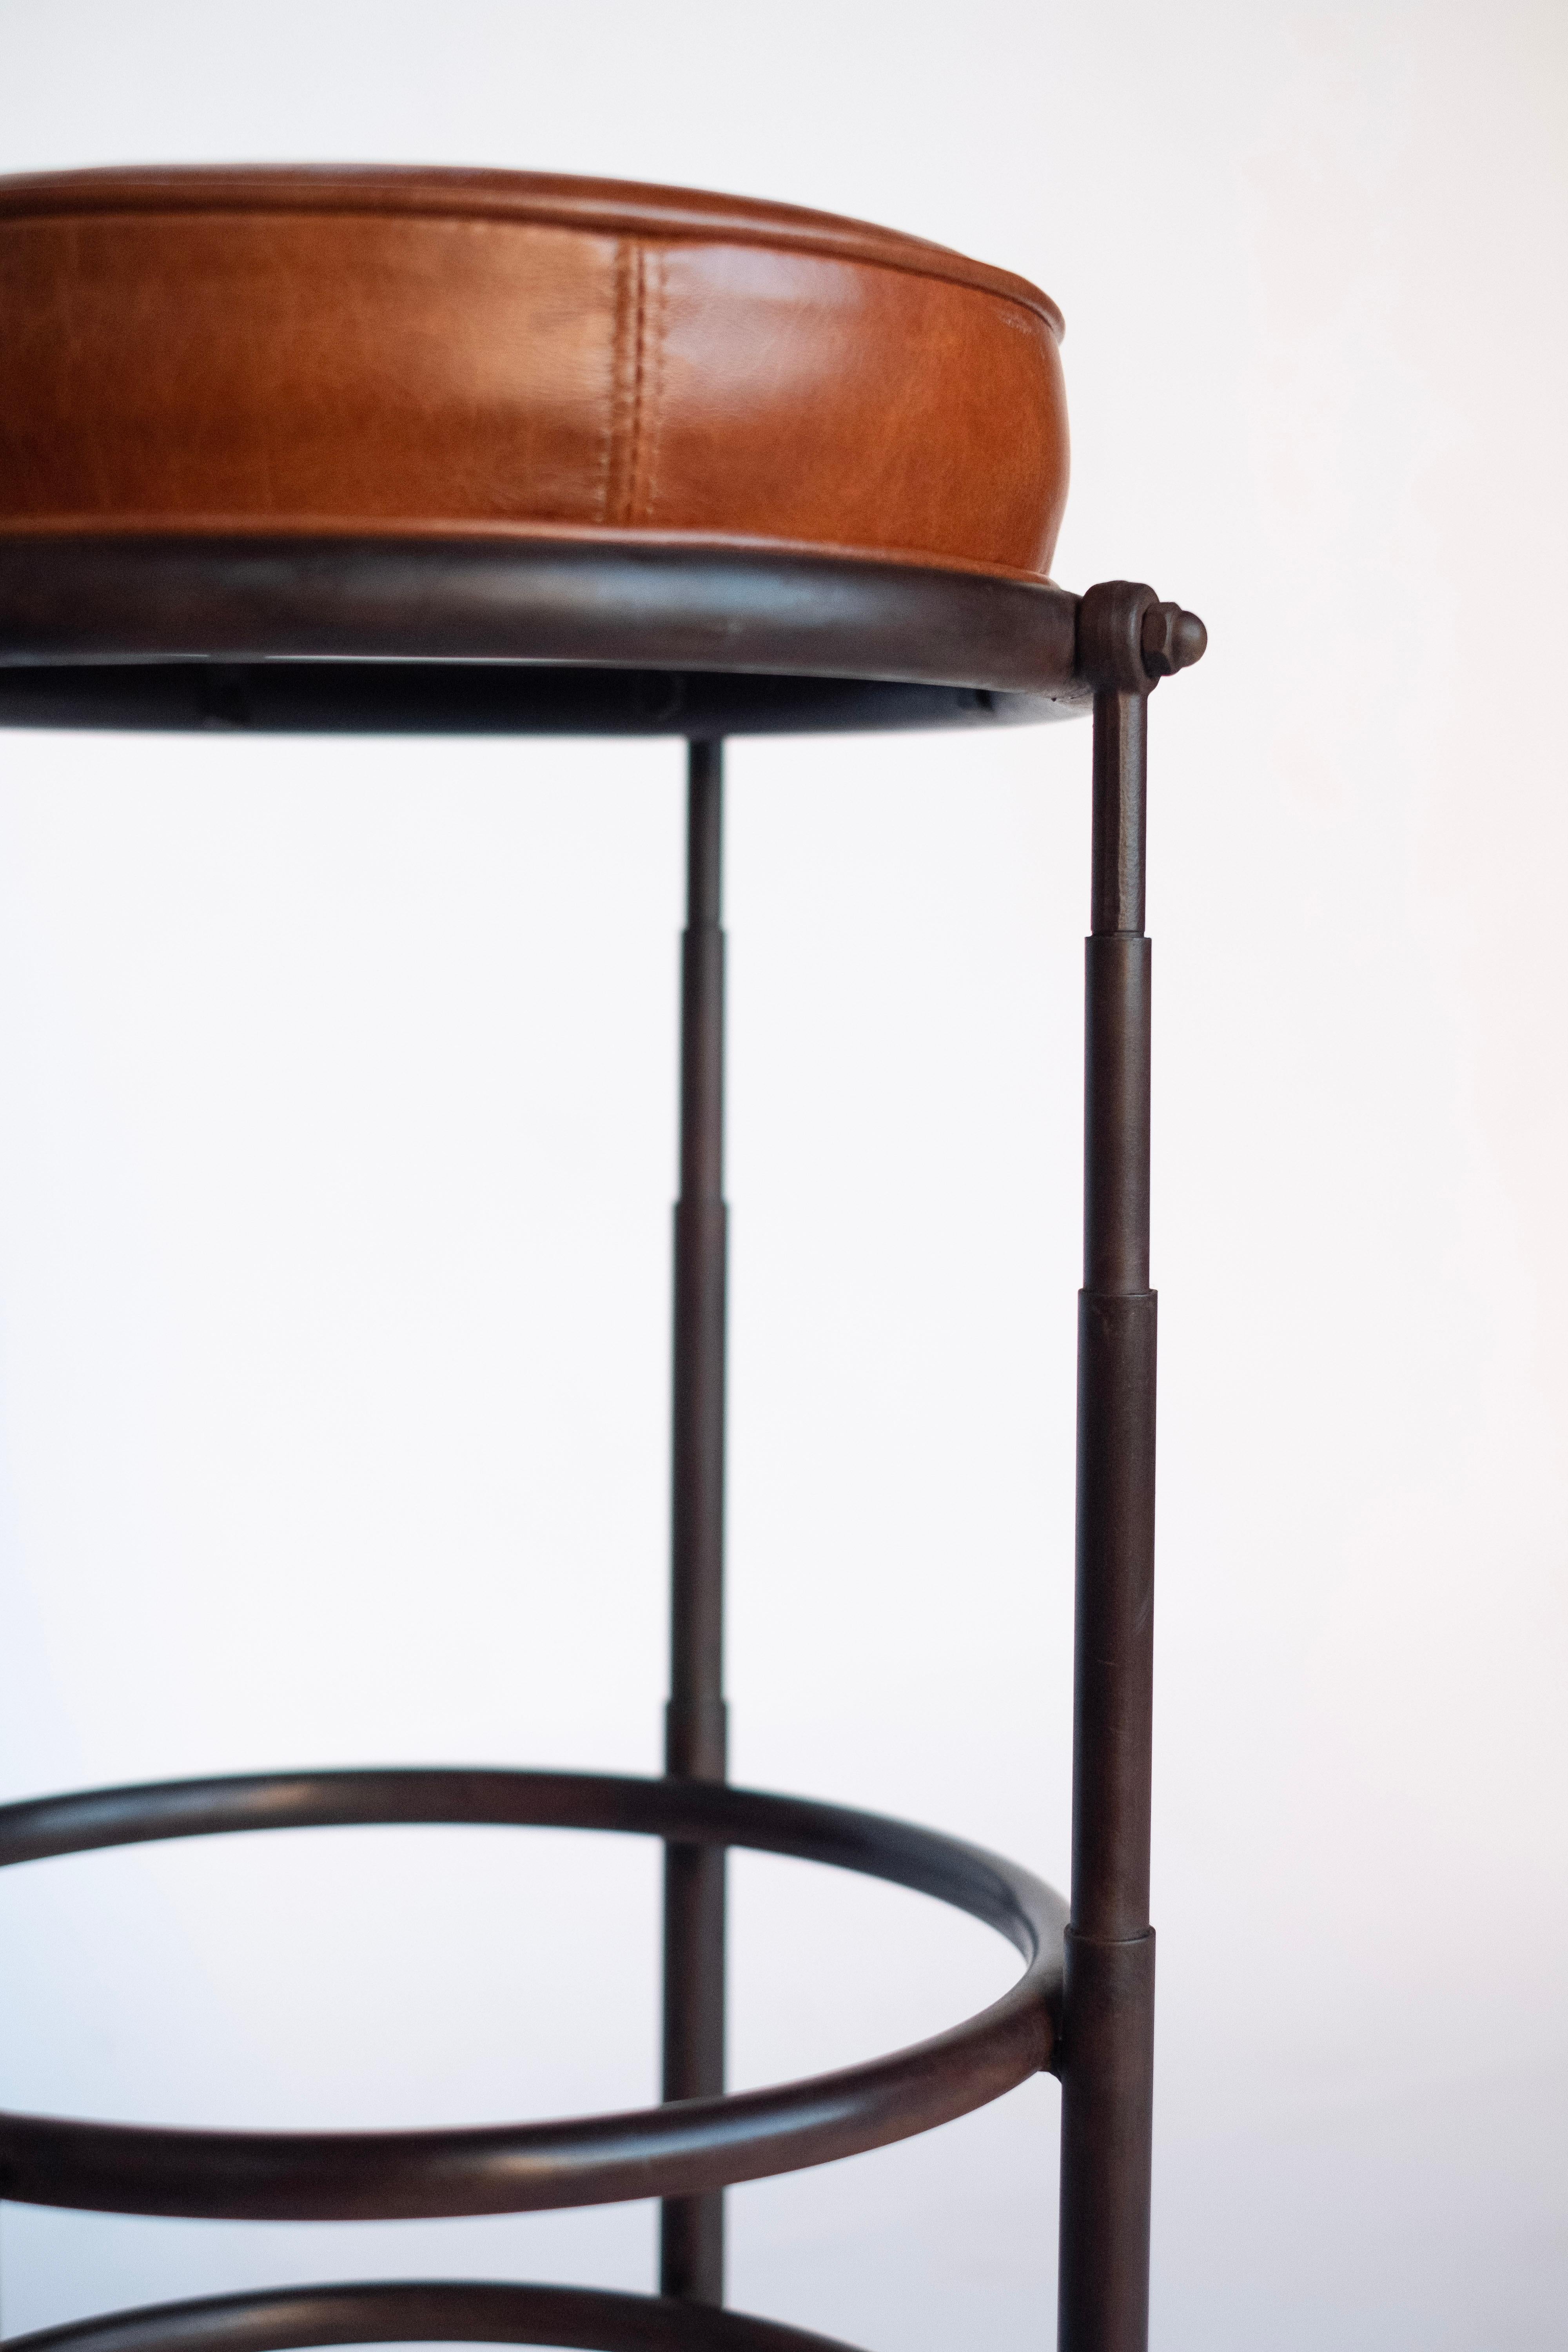 Stools in Patinated Steel and Leather from Cairo720, Jordan Mozer, 1997-2019 In Excellent Condition For Sale In Chicago, IL